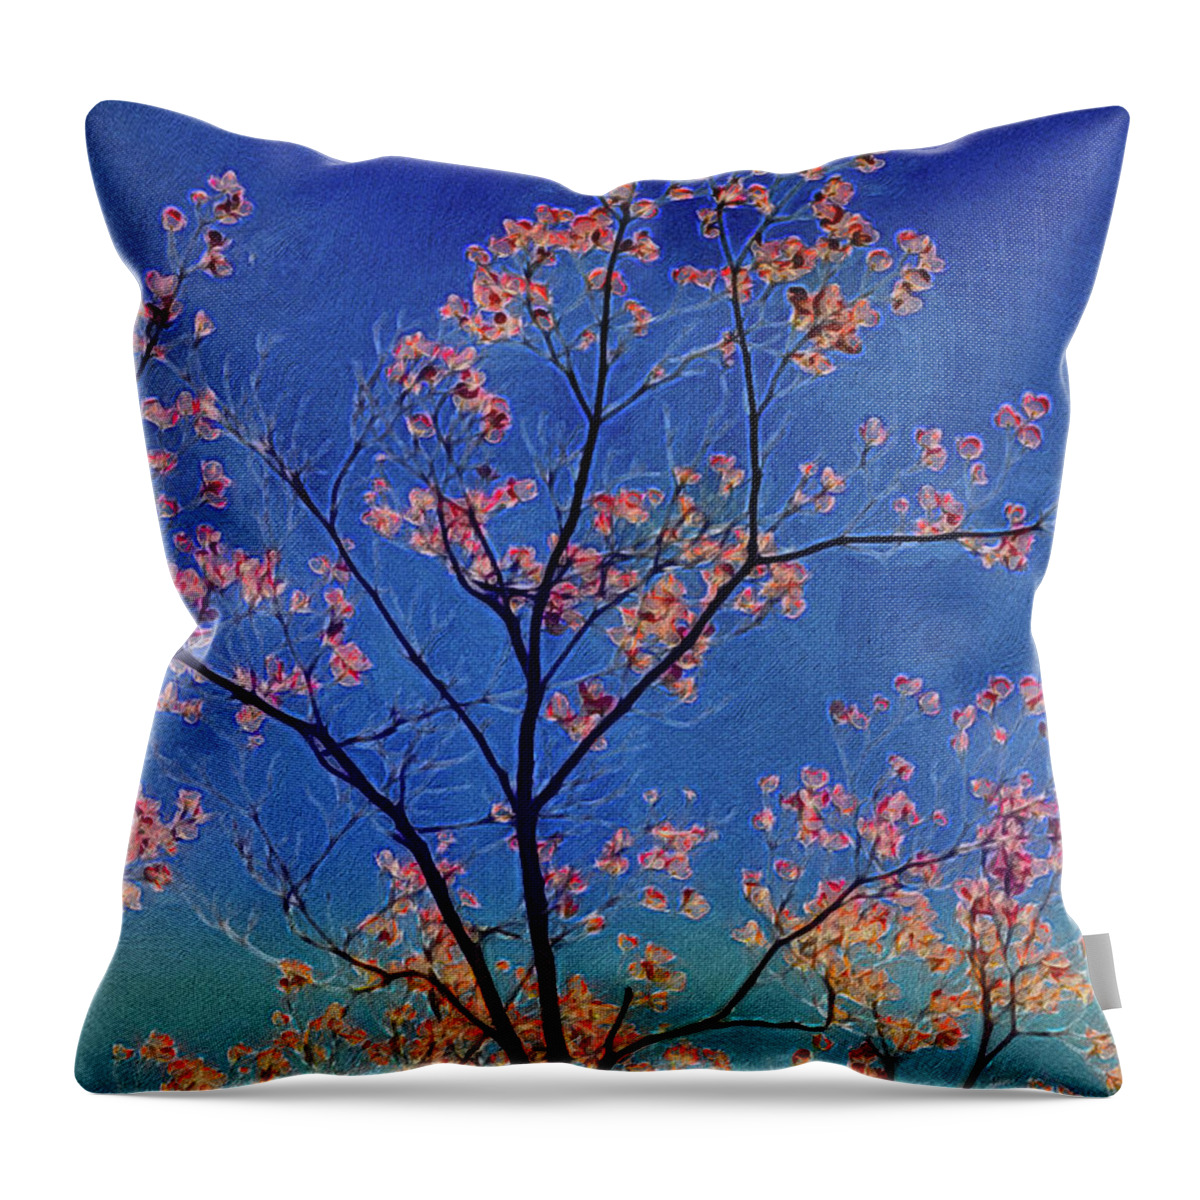 Dogwood Trees Throw Pillow featuring the digital art Blue Ocean Dogwoods by Kevin Lane